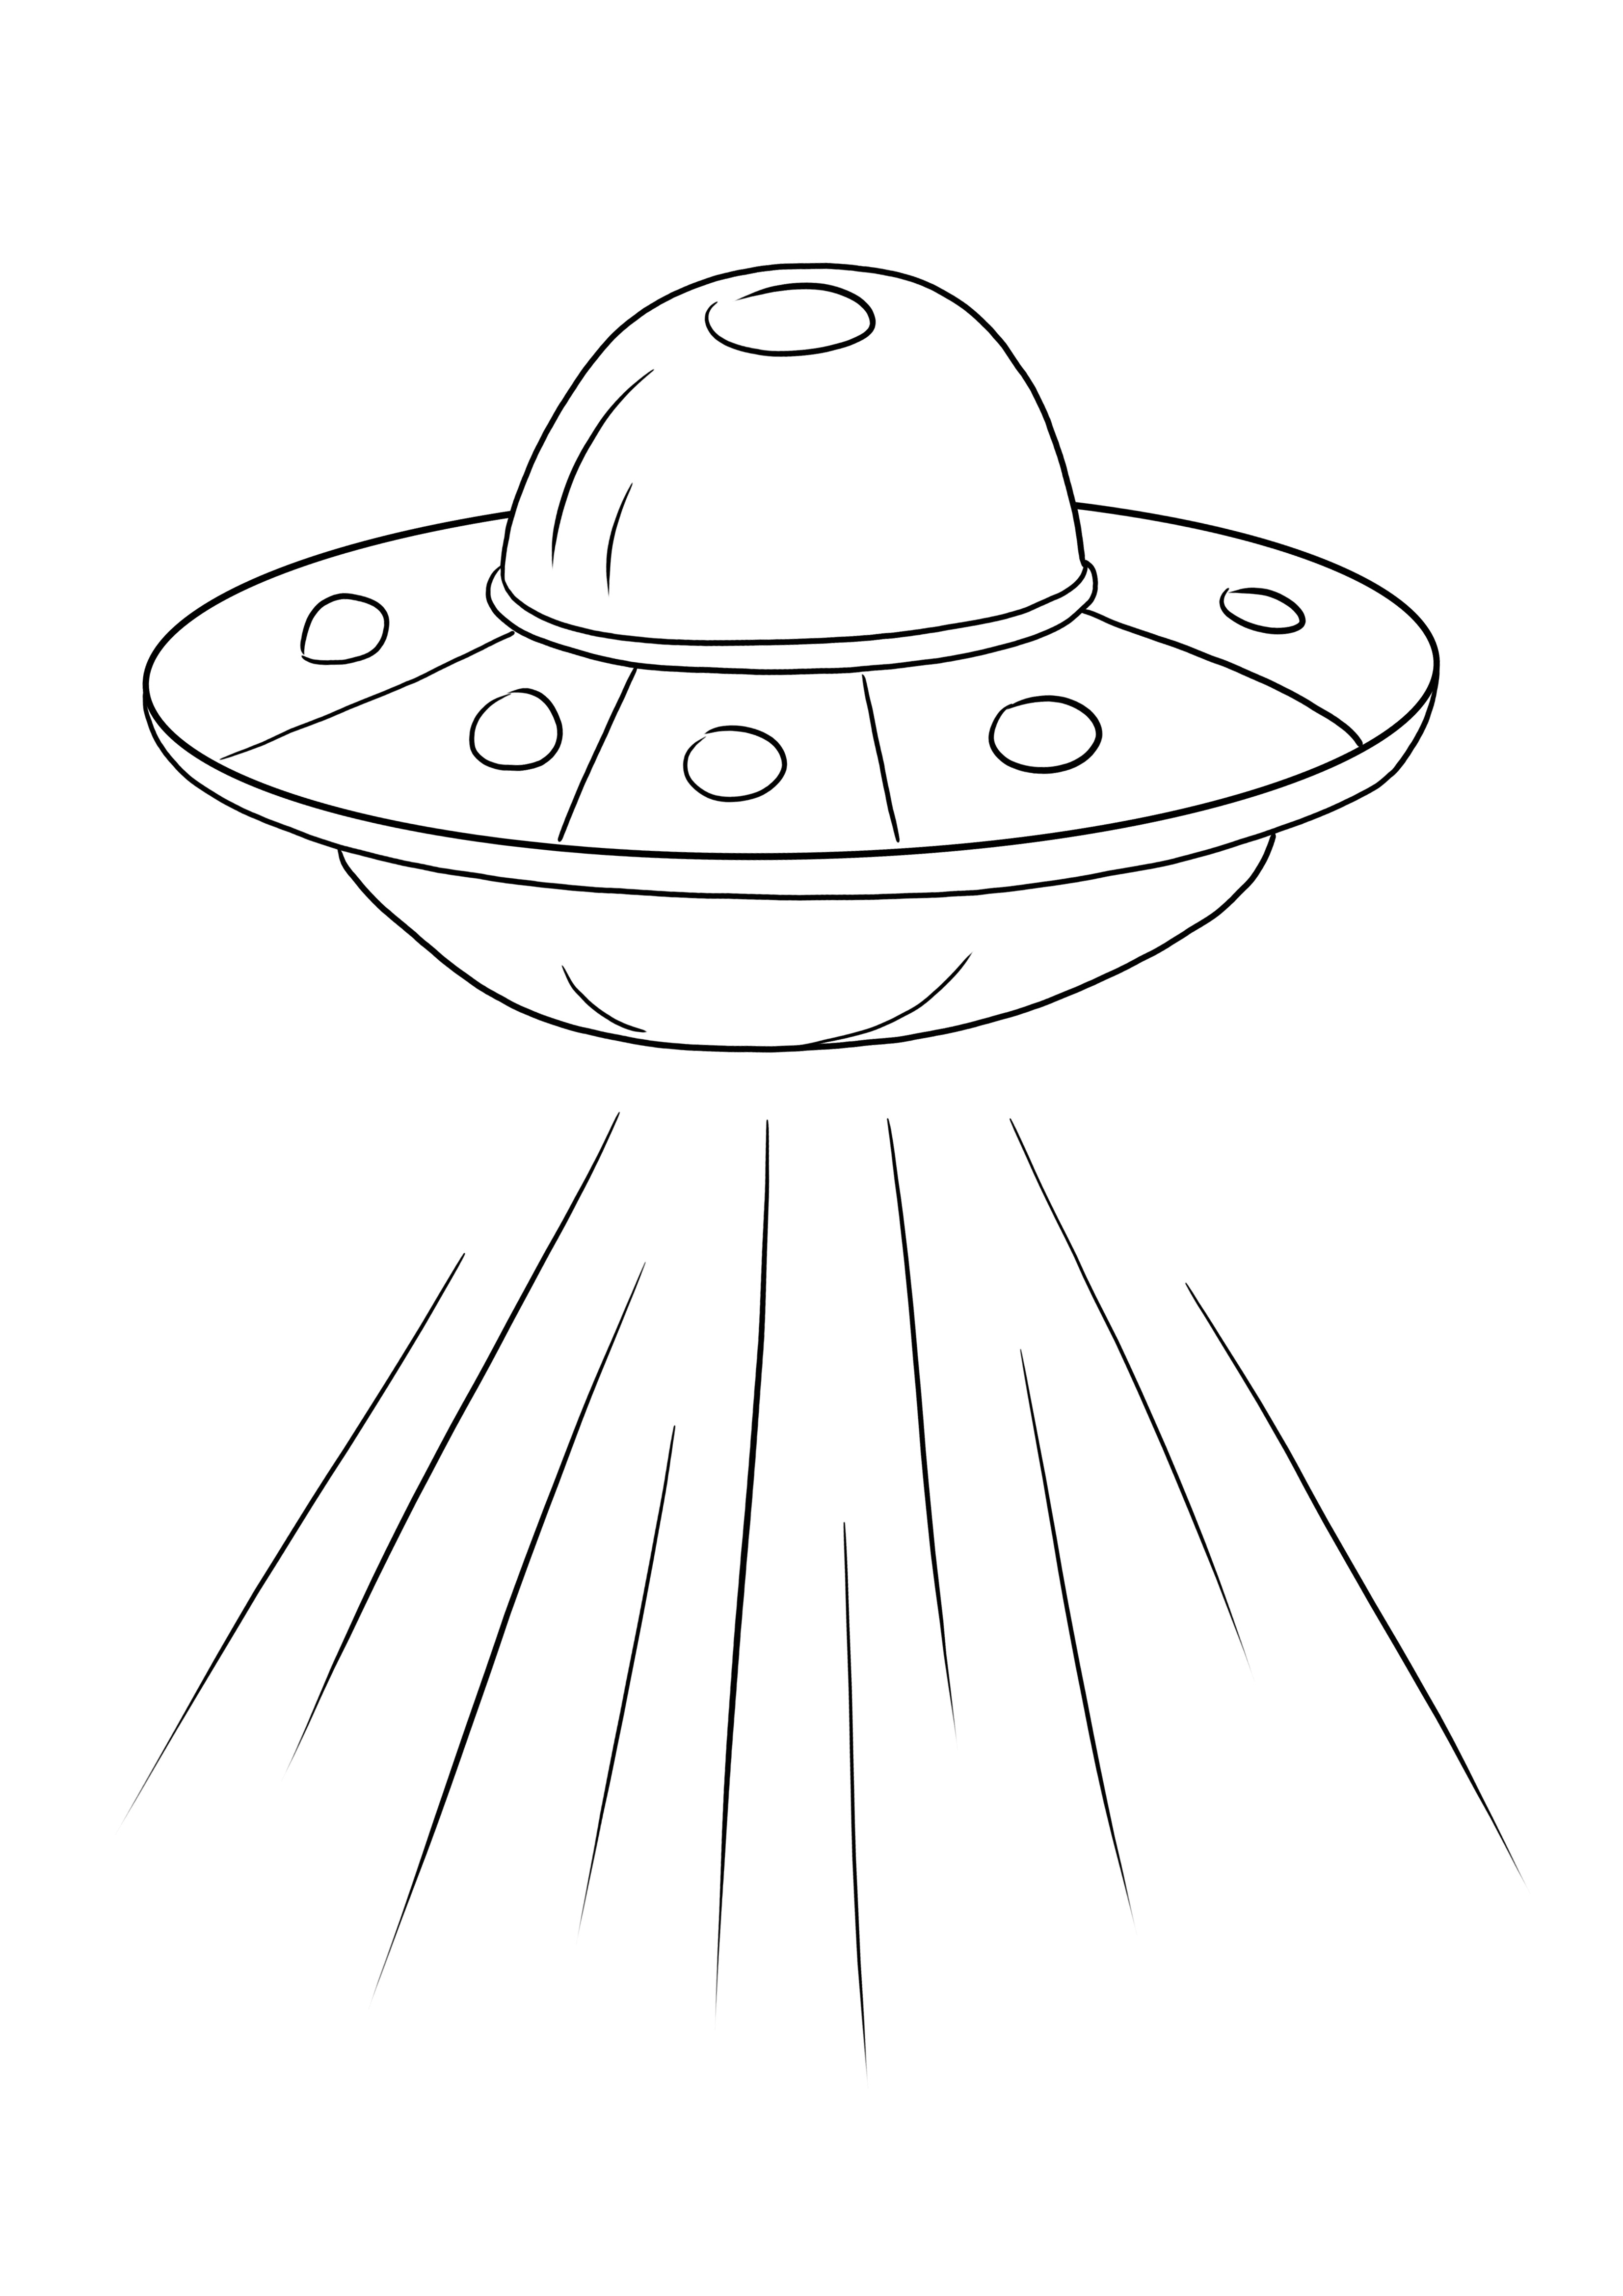 Alien Spaceship taking off to print and color for kids of all ages